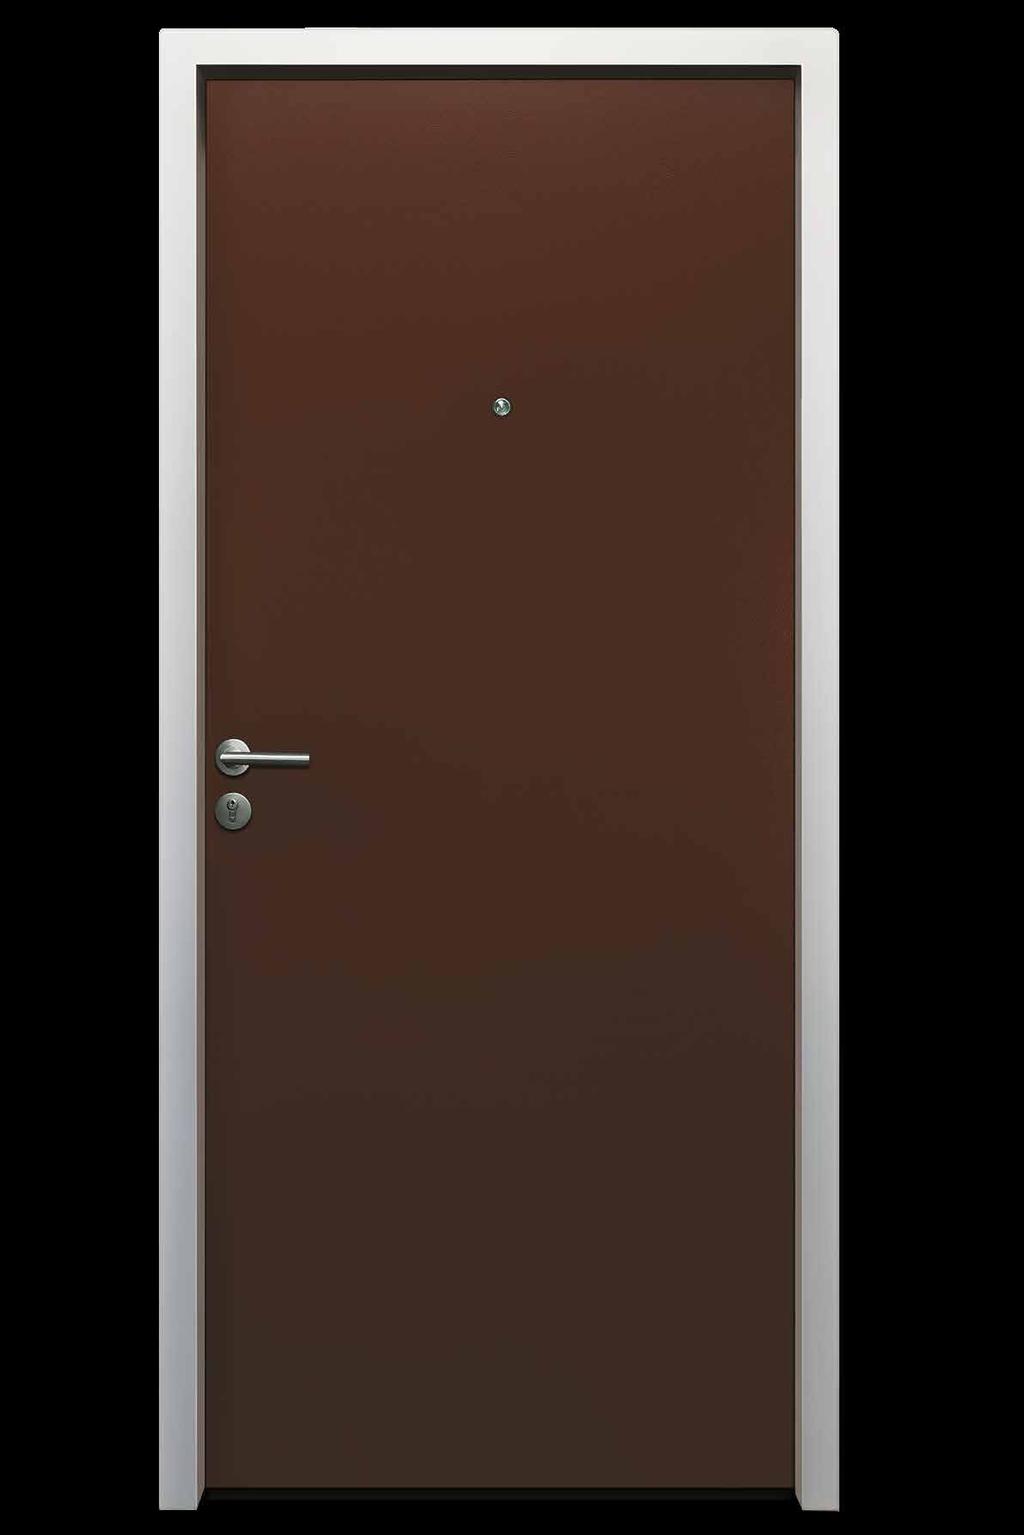 PANEL EMBOSSED DOORS LEATHER FINISH DOORS The high definition 6 panel embossed design gives it the feel of a genuine wood panel door. These doors are available in a range of colours.